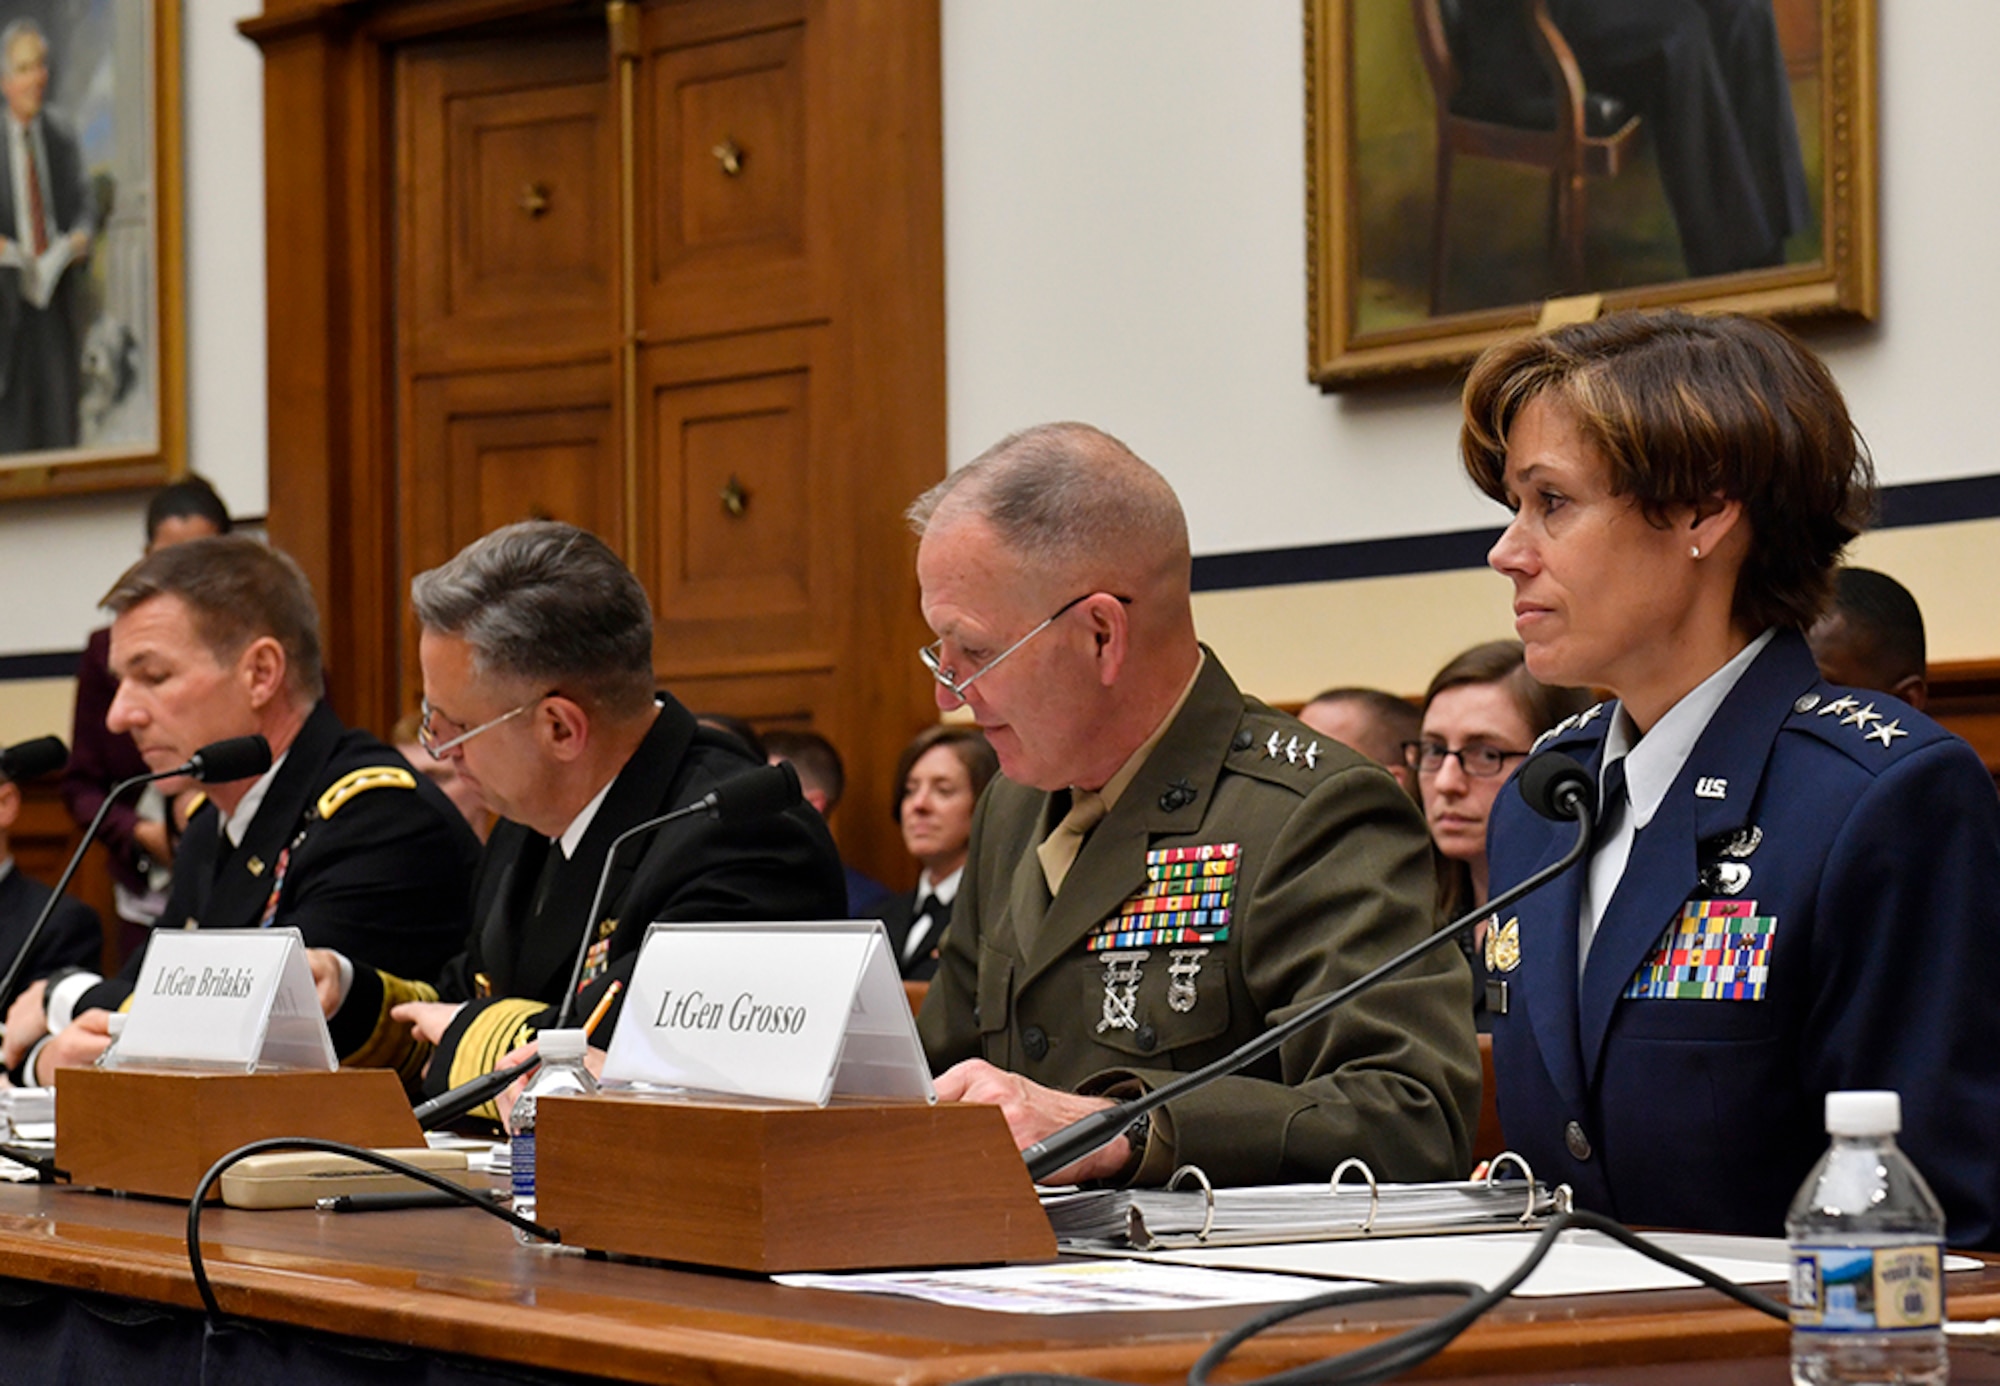 Lt. Gen. Gina Grosso, the Air Force deputy chief of staff for manpower and personnel services, testifies before the House Armed Services Subcommittee on military personnel posture May 17, 2017, in Washington, D.C. Grosso testified with Marine Corps Lt. Gen. Mark Brilakis, the U.S. Marine Corps deputy commandant for manpower and reserve affairs; Navy Vice Adm. Robert Burke, the U.S. Navy Chief of naval personnel; and Army Maj. Gen. Erik Peterson, the U.S. Army director of Army aviation. (U.S. Air Force photo/Wayne A. Clark)